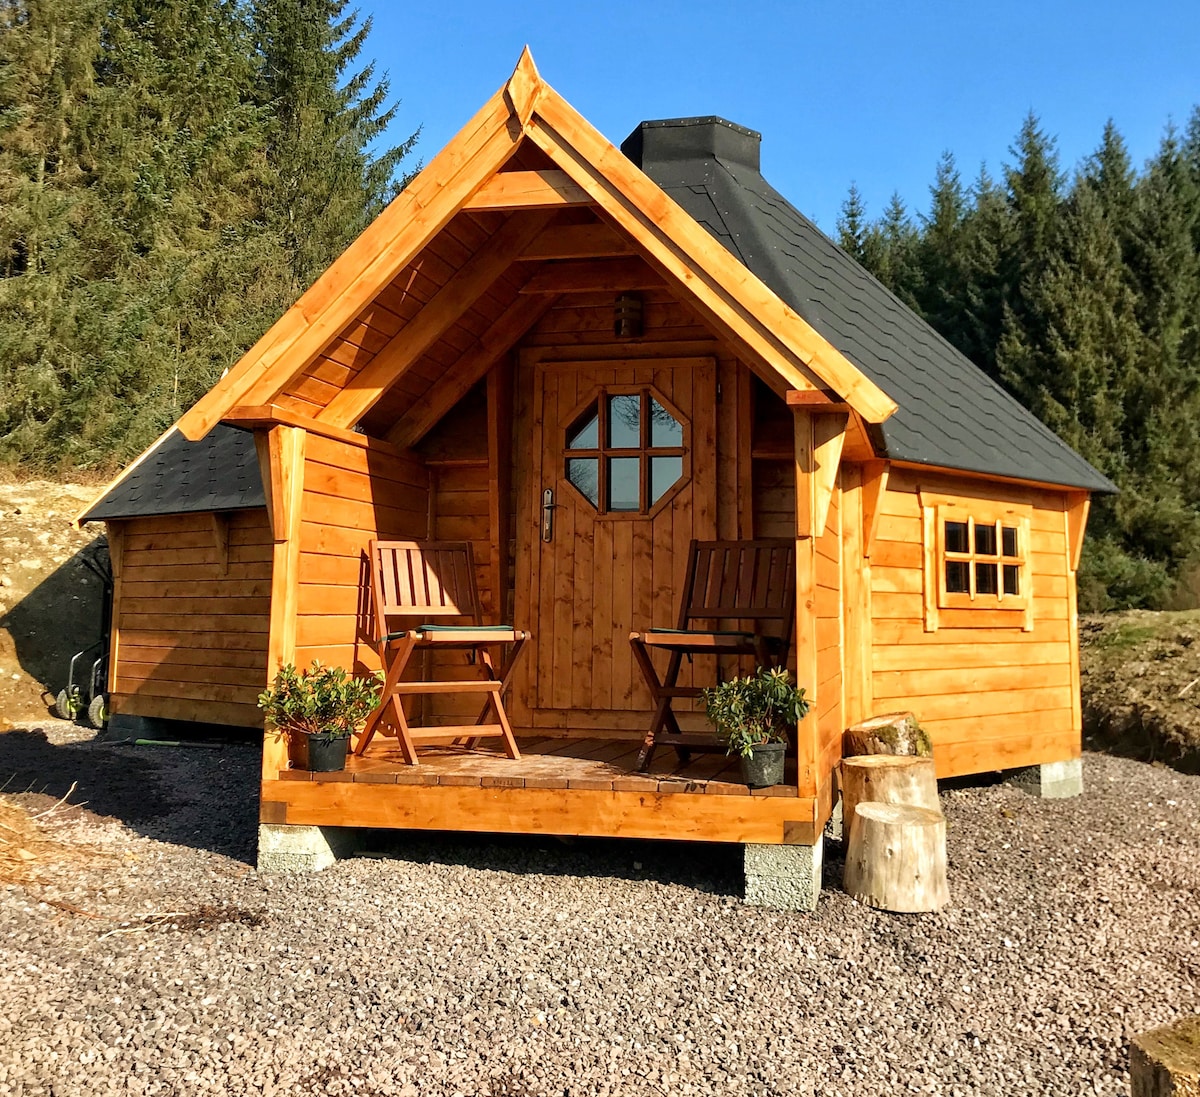 The Nest Glamping cabin